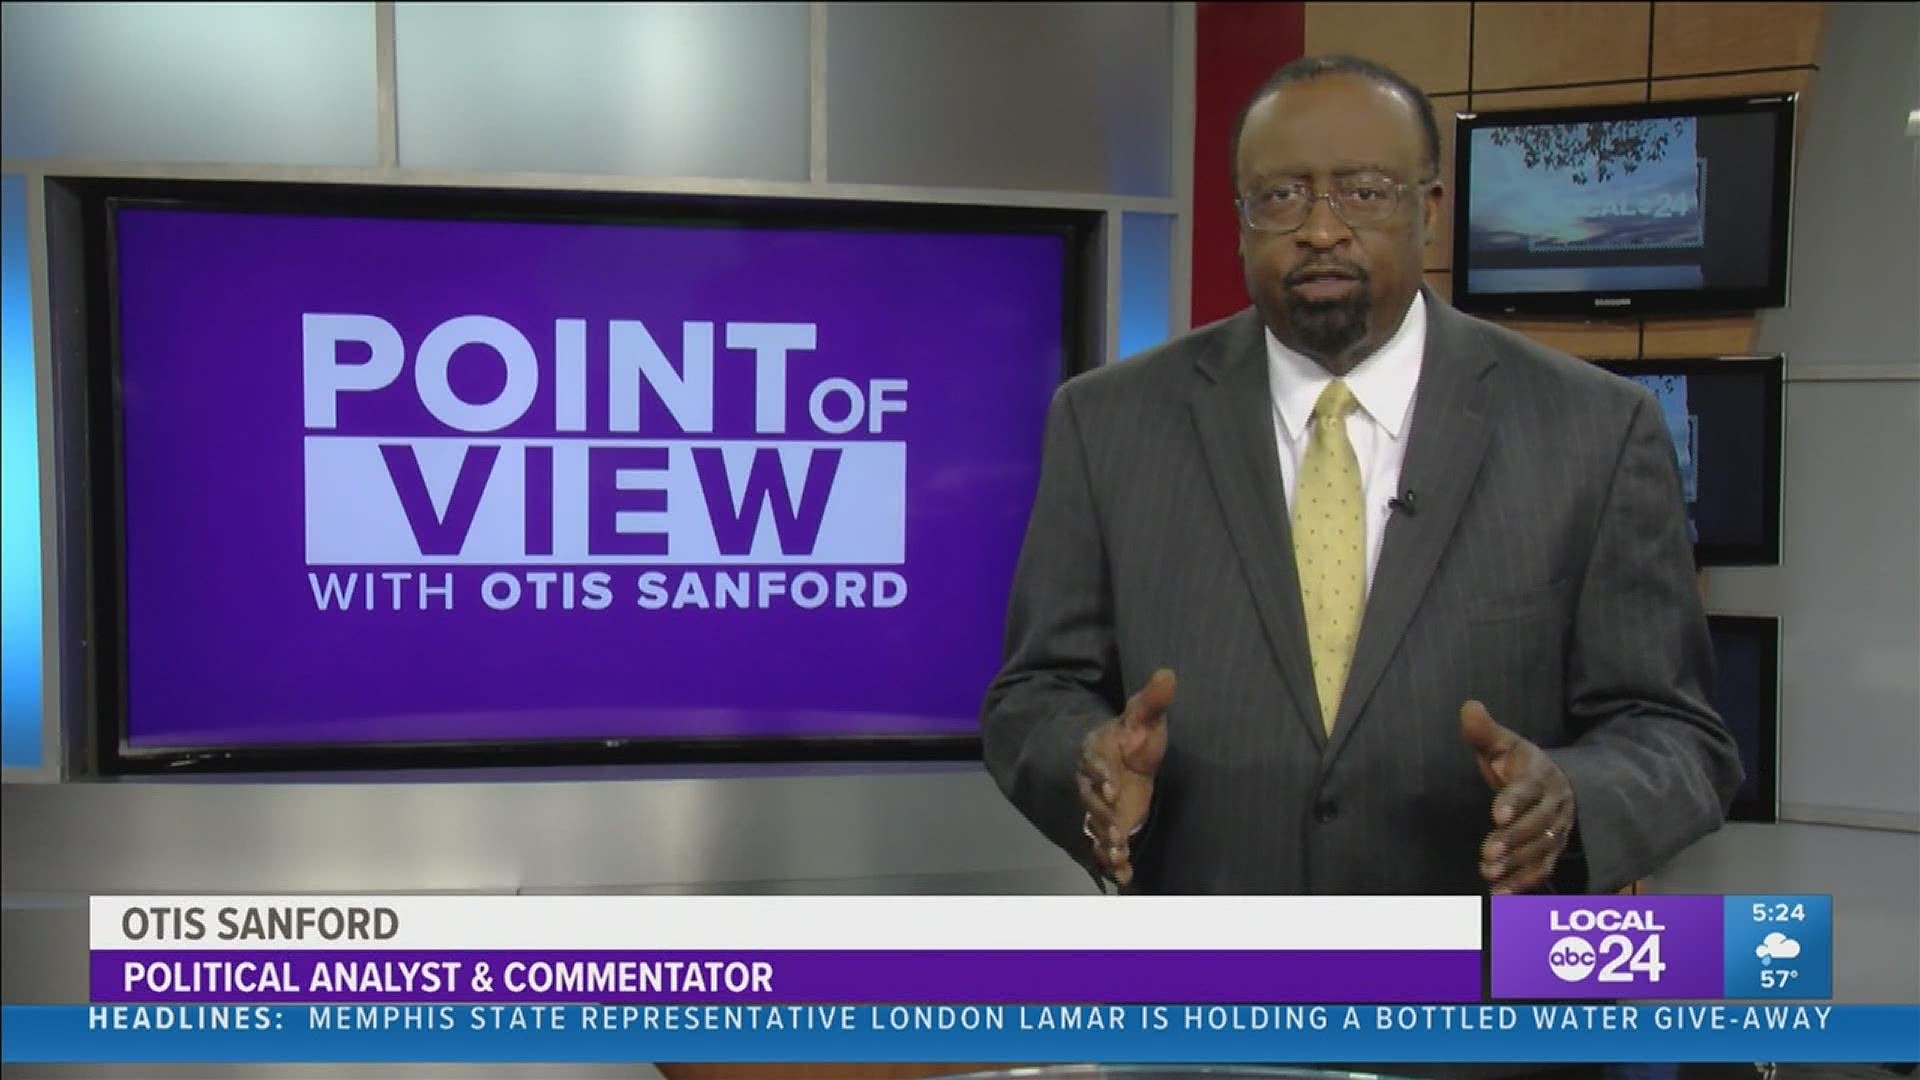 Local 24 News political analyst and commentator Otis Sanford shares his point of view on what we learned from MLGW’s water woes in Memphis.